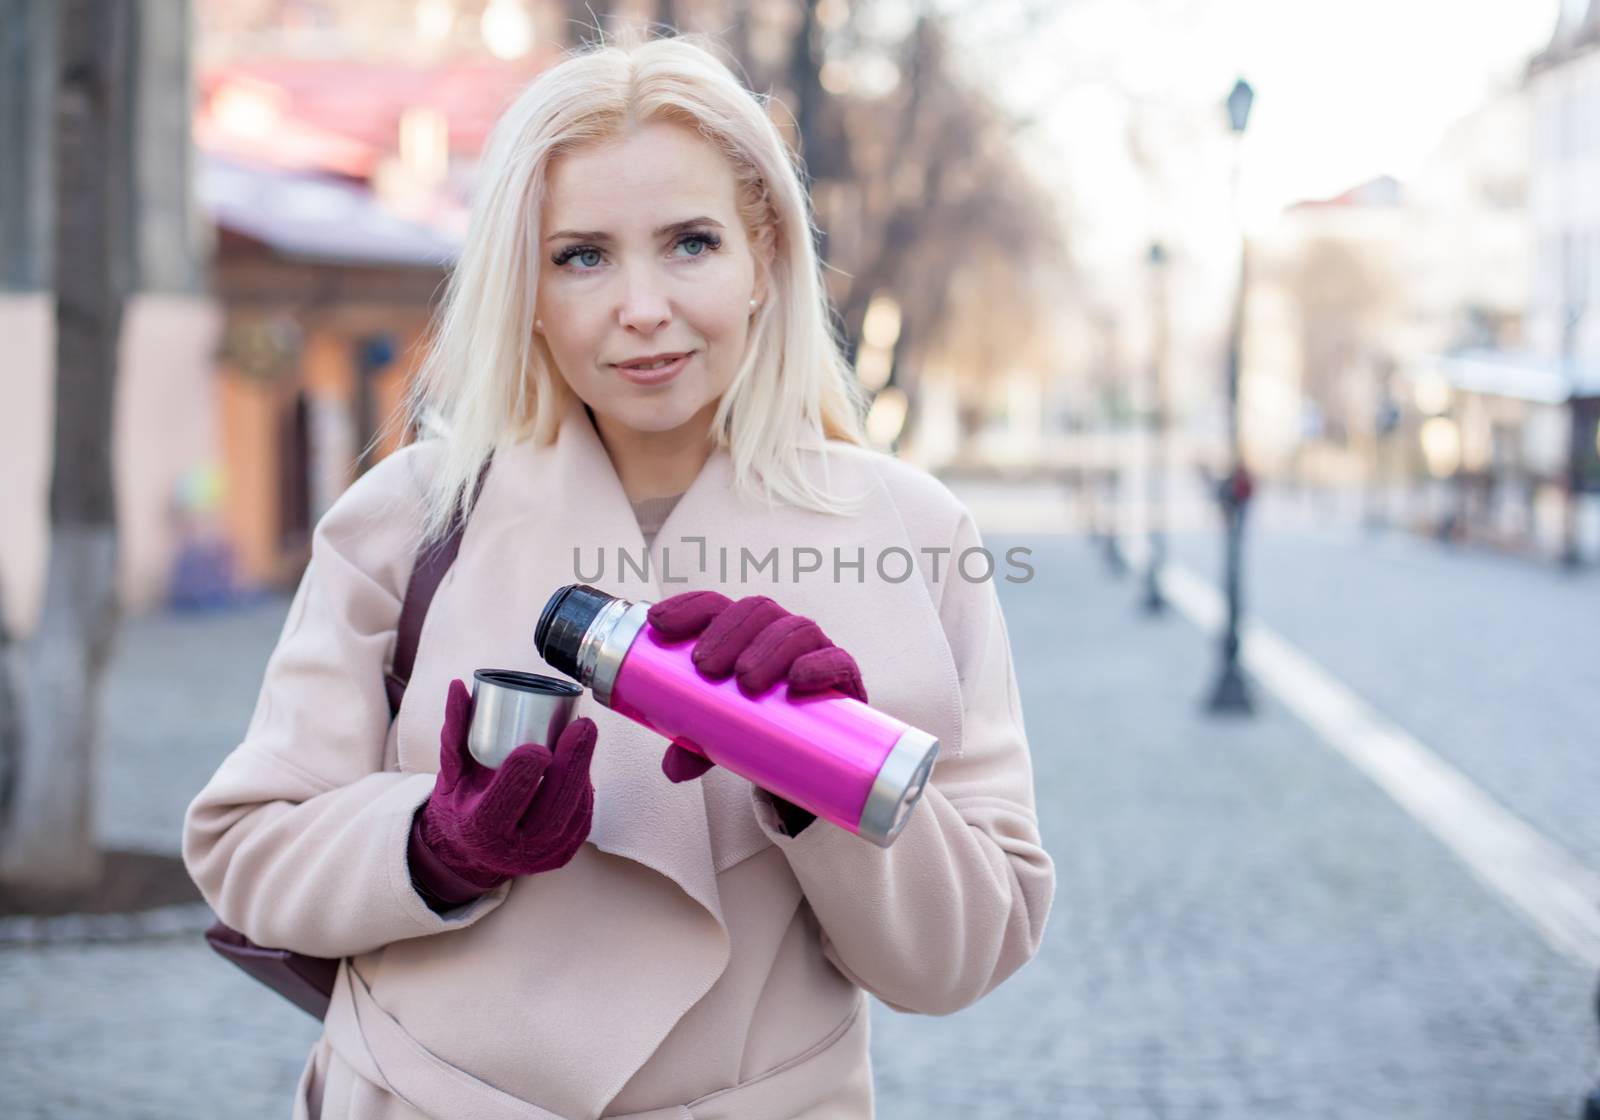 Outdoor of gorgeous woman with blond hair in elegant coat and gloves walking in street with thermos of tea